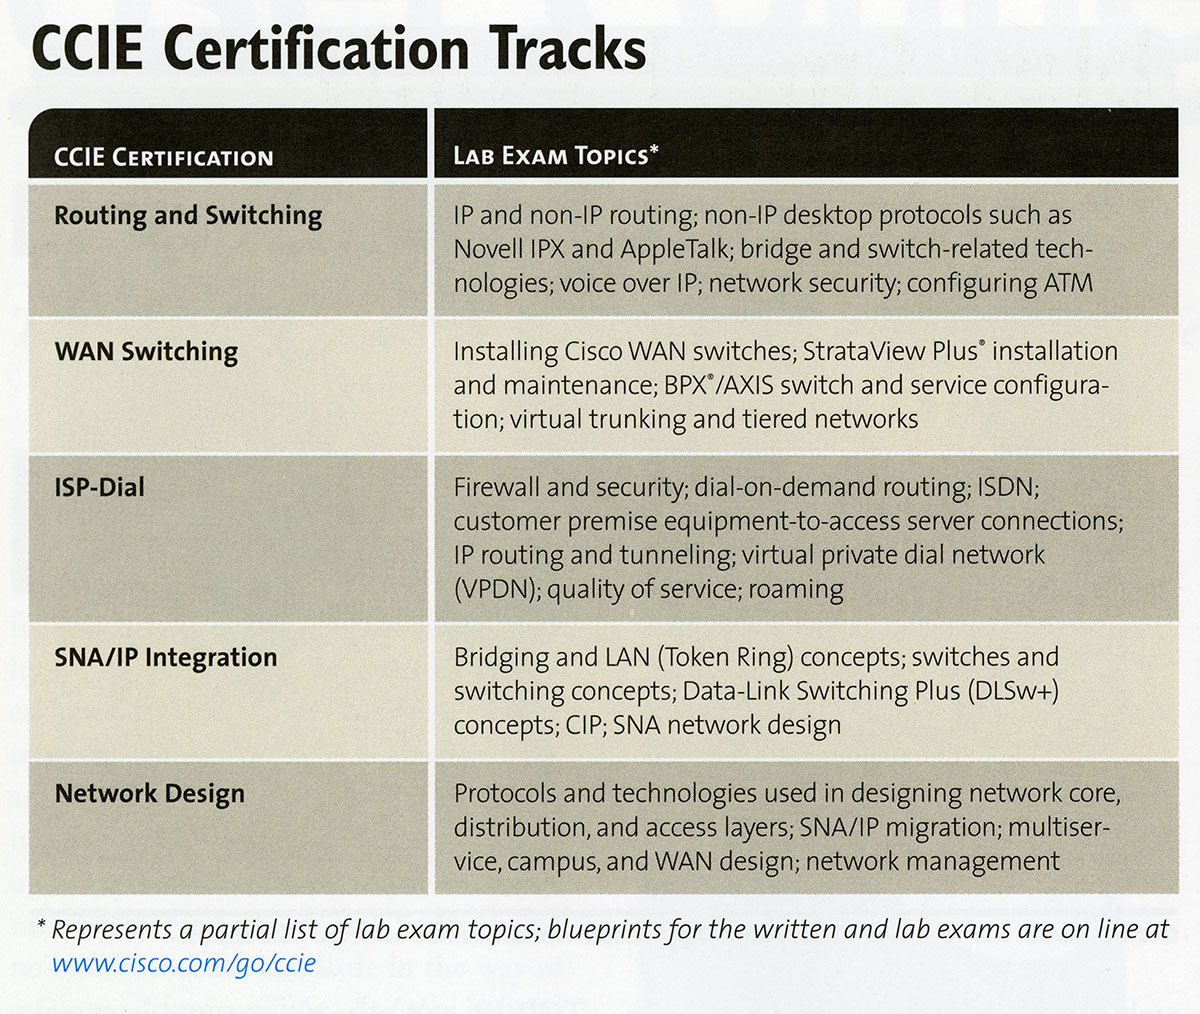 A table with two columns, CCIE Certification and Lab Exam Topics, is broken down by each CCIE certification sub-type with the following info: Routing and Switching IP and non-IP routing; non-IP desktop protocols such as Novell IPX and AppleTalk; bridge and swithc-related technologies; voice over IP; network security; configuring ATM, WAN switching: Installing Cisco WAN switches; stratview plus installgation and maintenance; BPX/AXIS switch and service configuration; virtual trunking and tiered networks; ISP-DIAL: Firewall and security; dial on demand routing; ISDN; customer premise equip-to-access server connections; IP routing and tunneling; virtual private dial network; quality of service; roaming, SNA/IP integration: Briding and LAN (token Ring) concepts; switches and switching concepts; data-link switching plus (DLSw+) concepts; CIP; SNA network design, Network Design: Porotocols and technologies used in designing network core, distribution and access layers; SNA/IP migration; multiservice, campus, and WAN design; network management